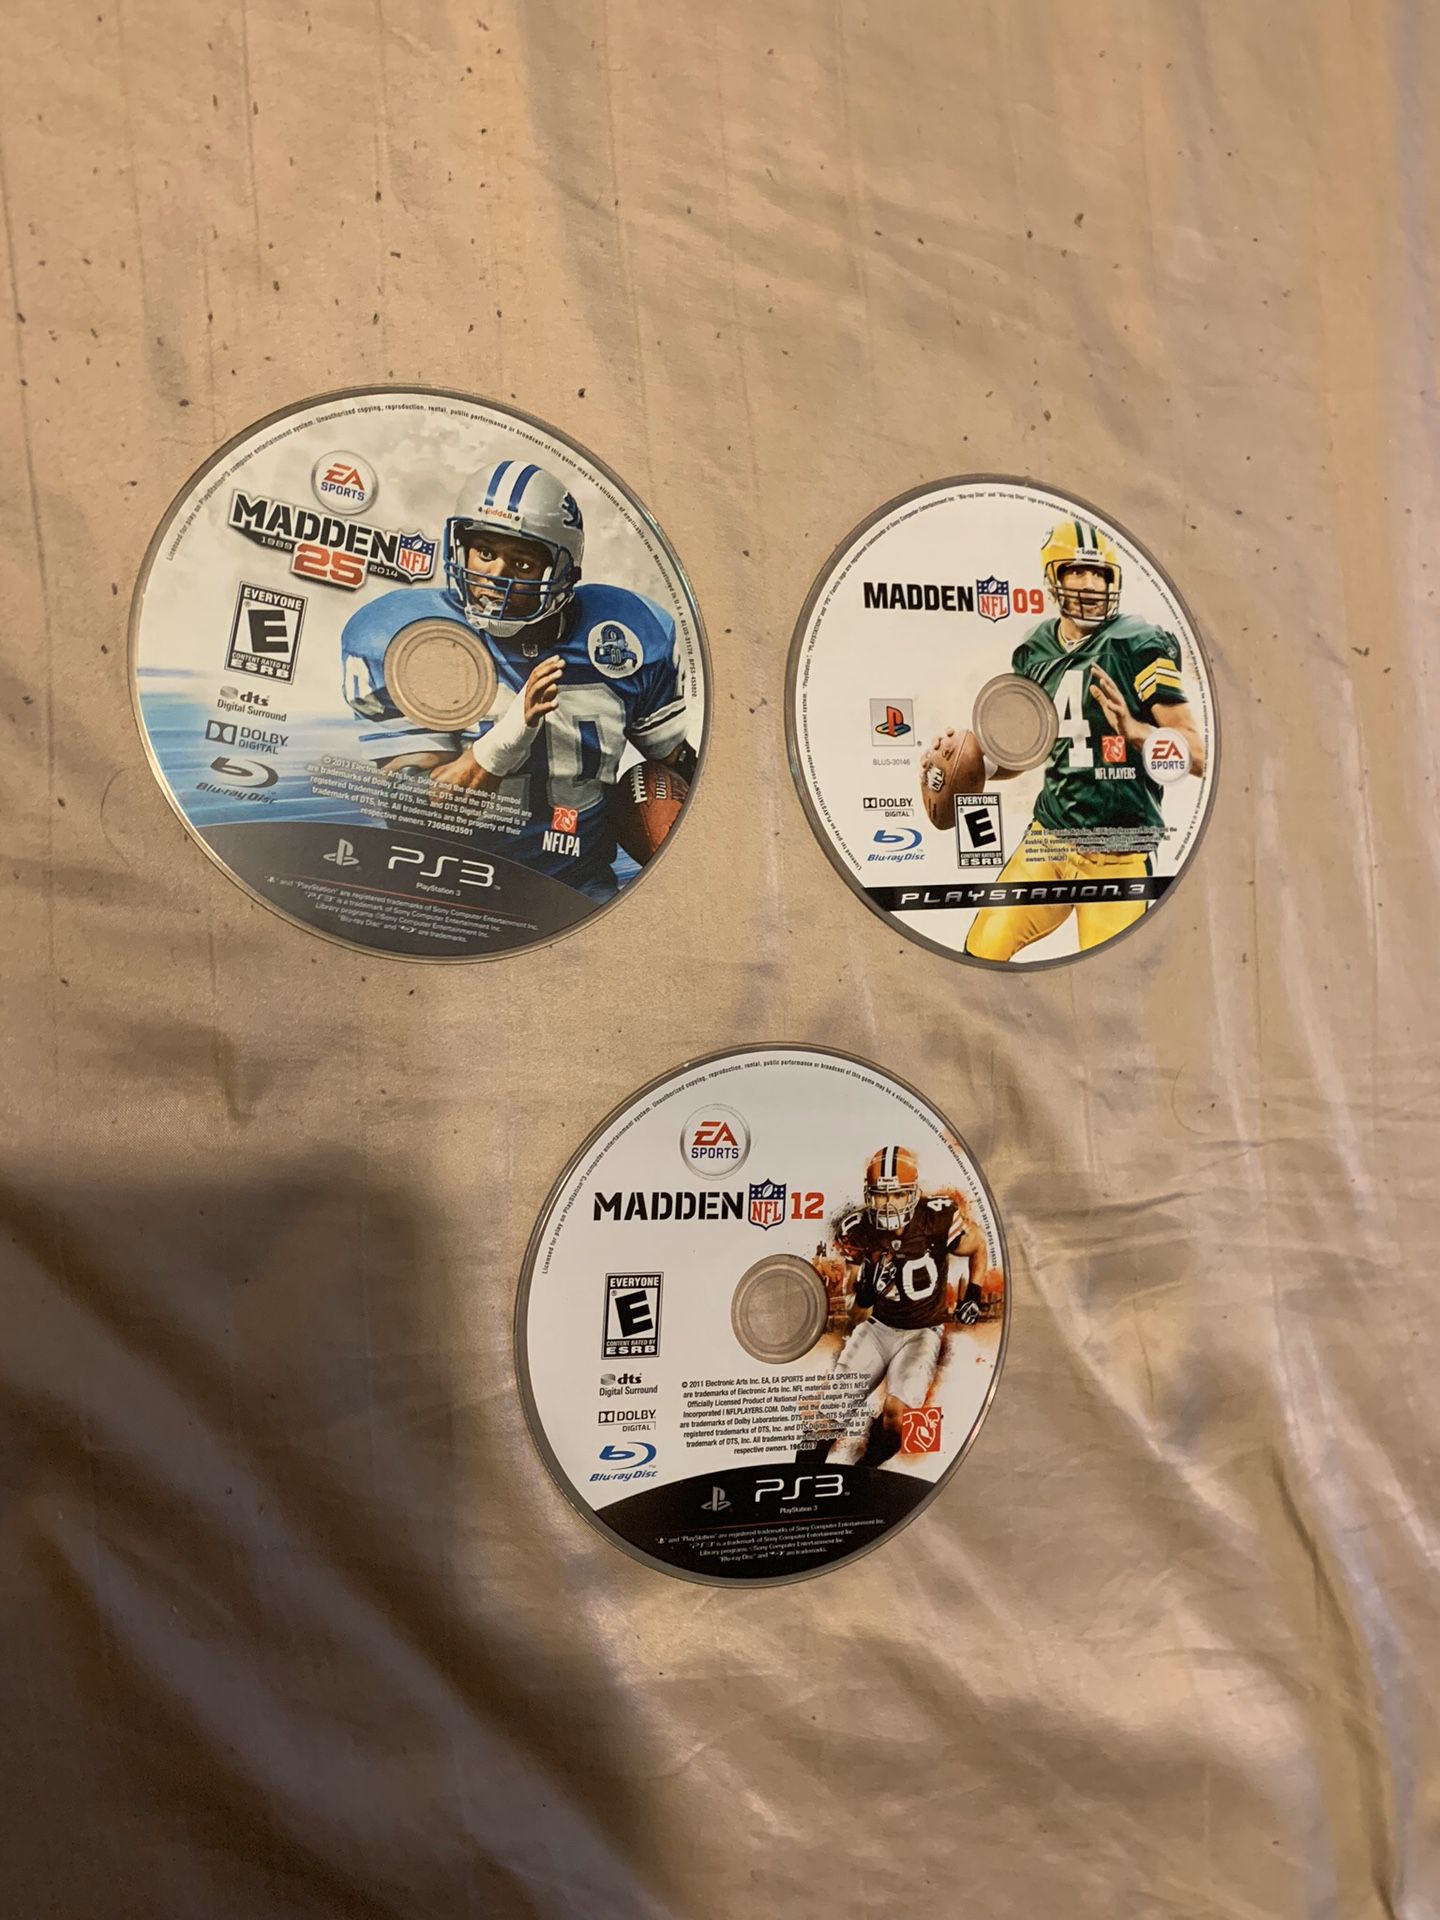 NFL Madden PS3 Games (All 3 included)